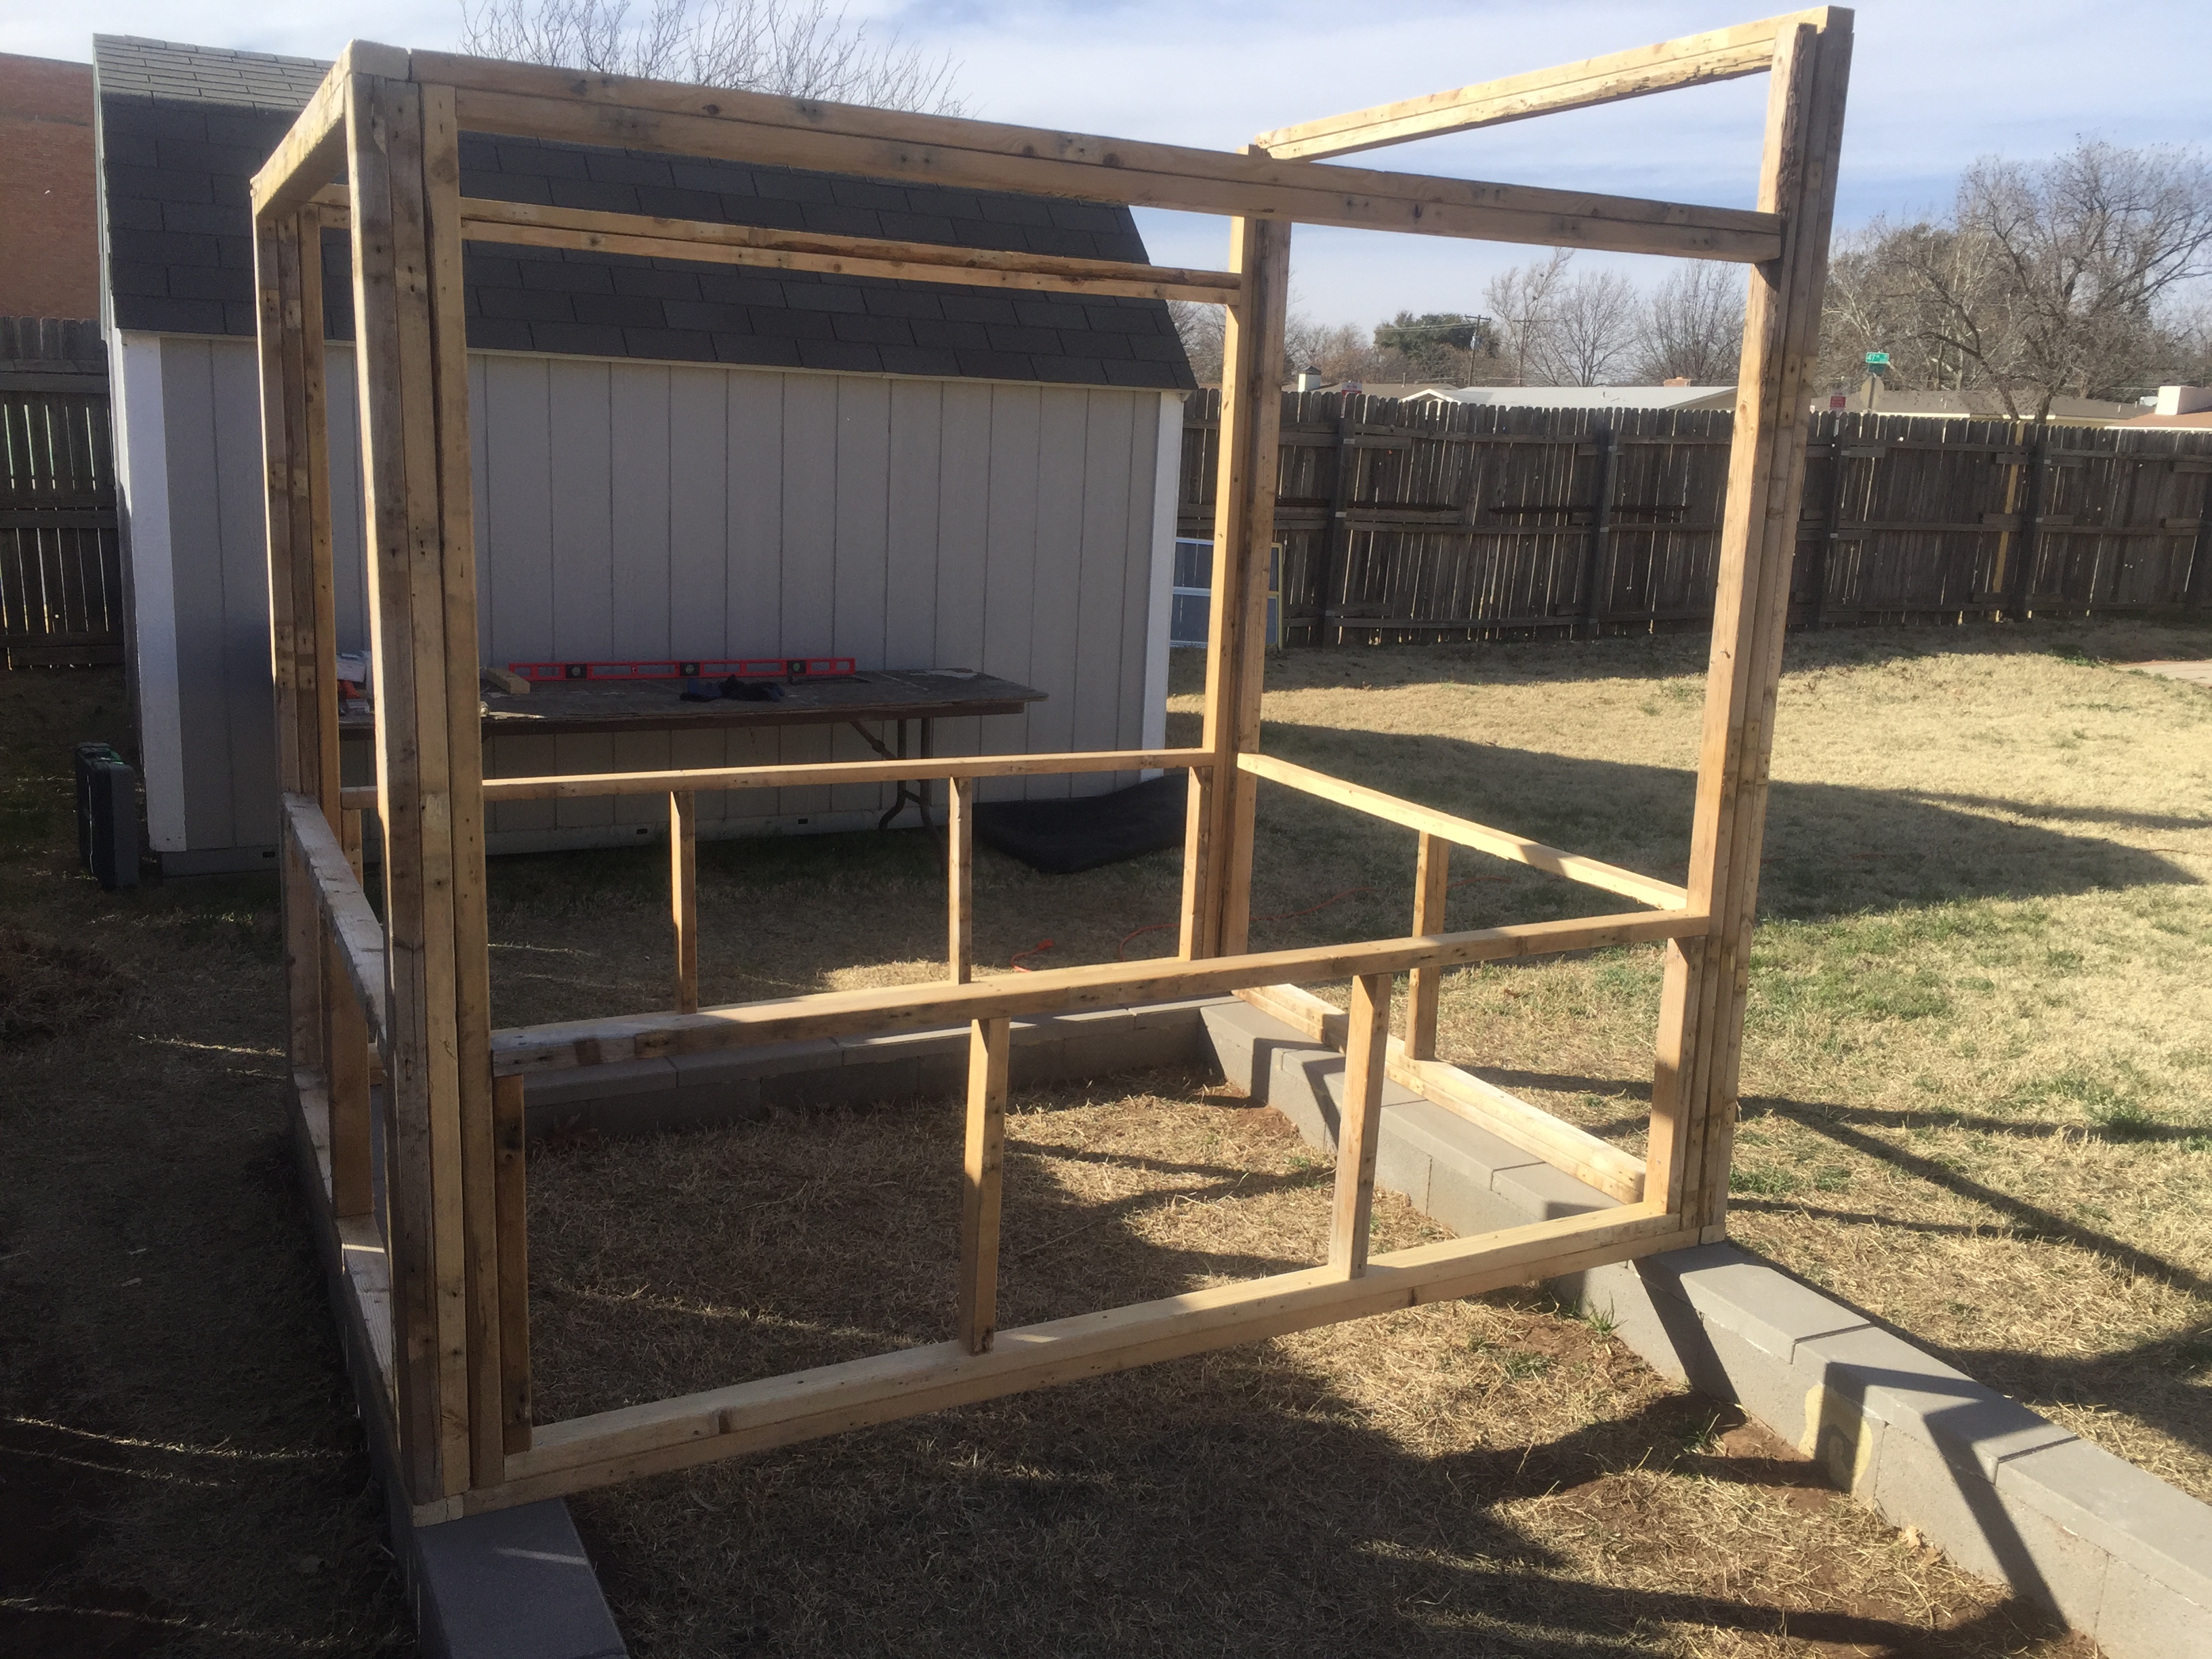 A bit more time today. Some more basic framing completed. Plywood arriving tomorrow. Also 3 windows on hand. Space under the coop will be sand for the girls to play. As I said before, the entire structure will be modular and can be disassembled/reassembled in one day!  This does however create some challenging design issues. Nothing this old bird can't handle.